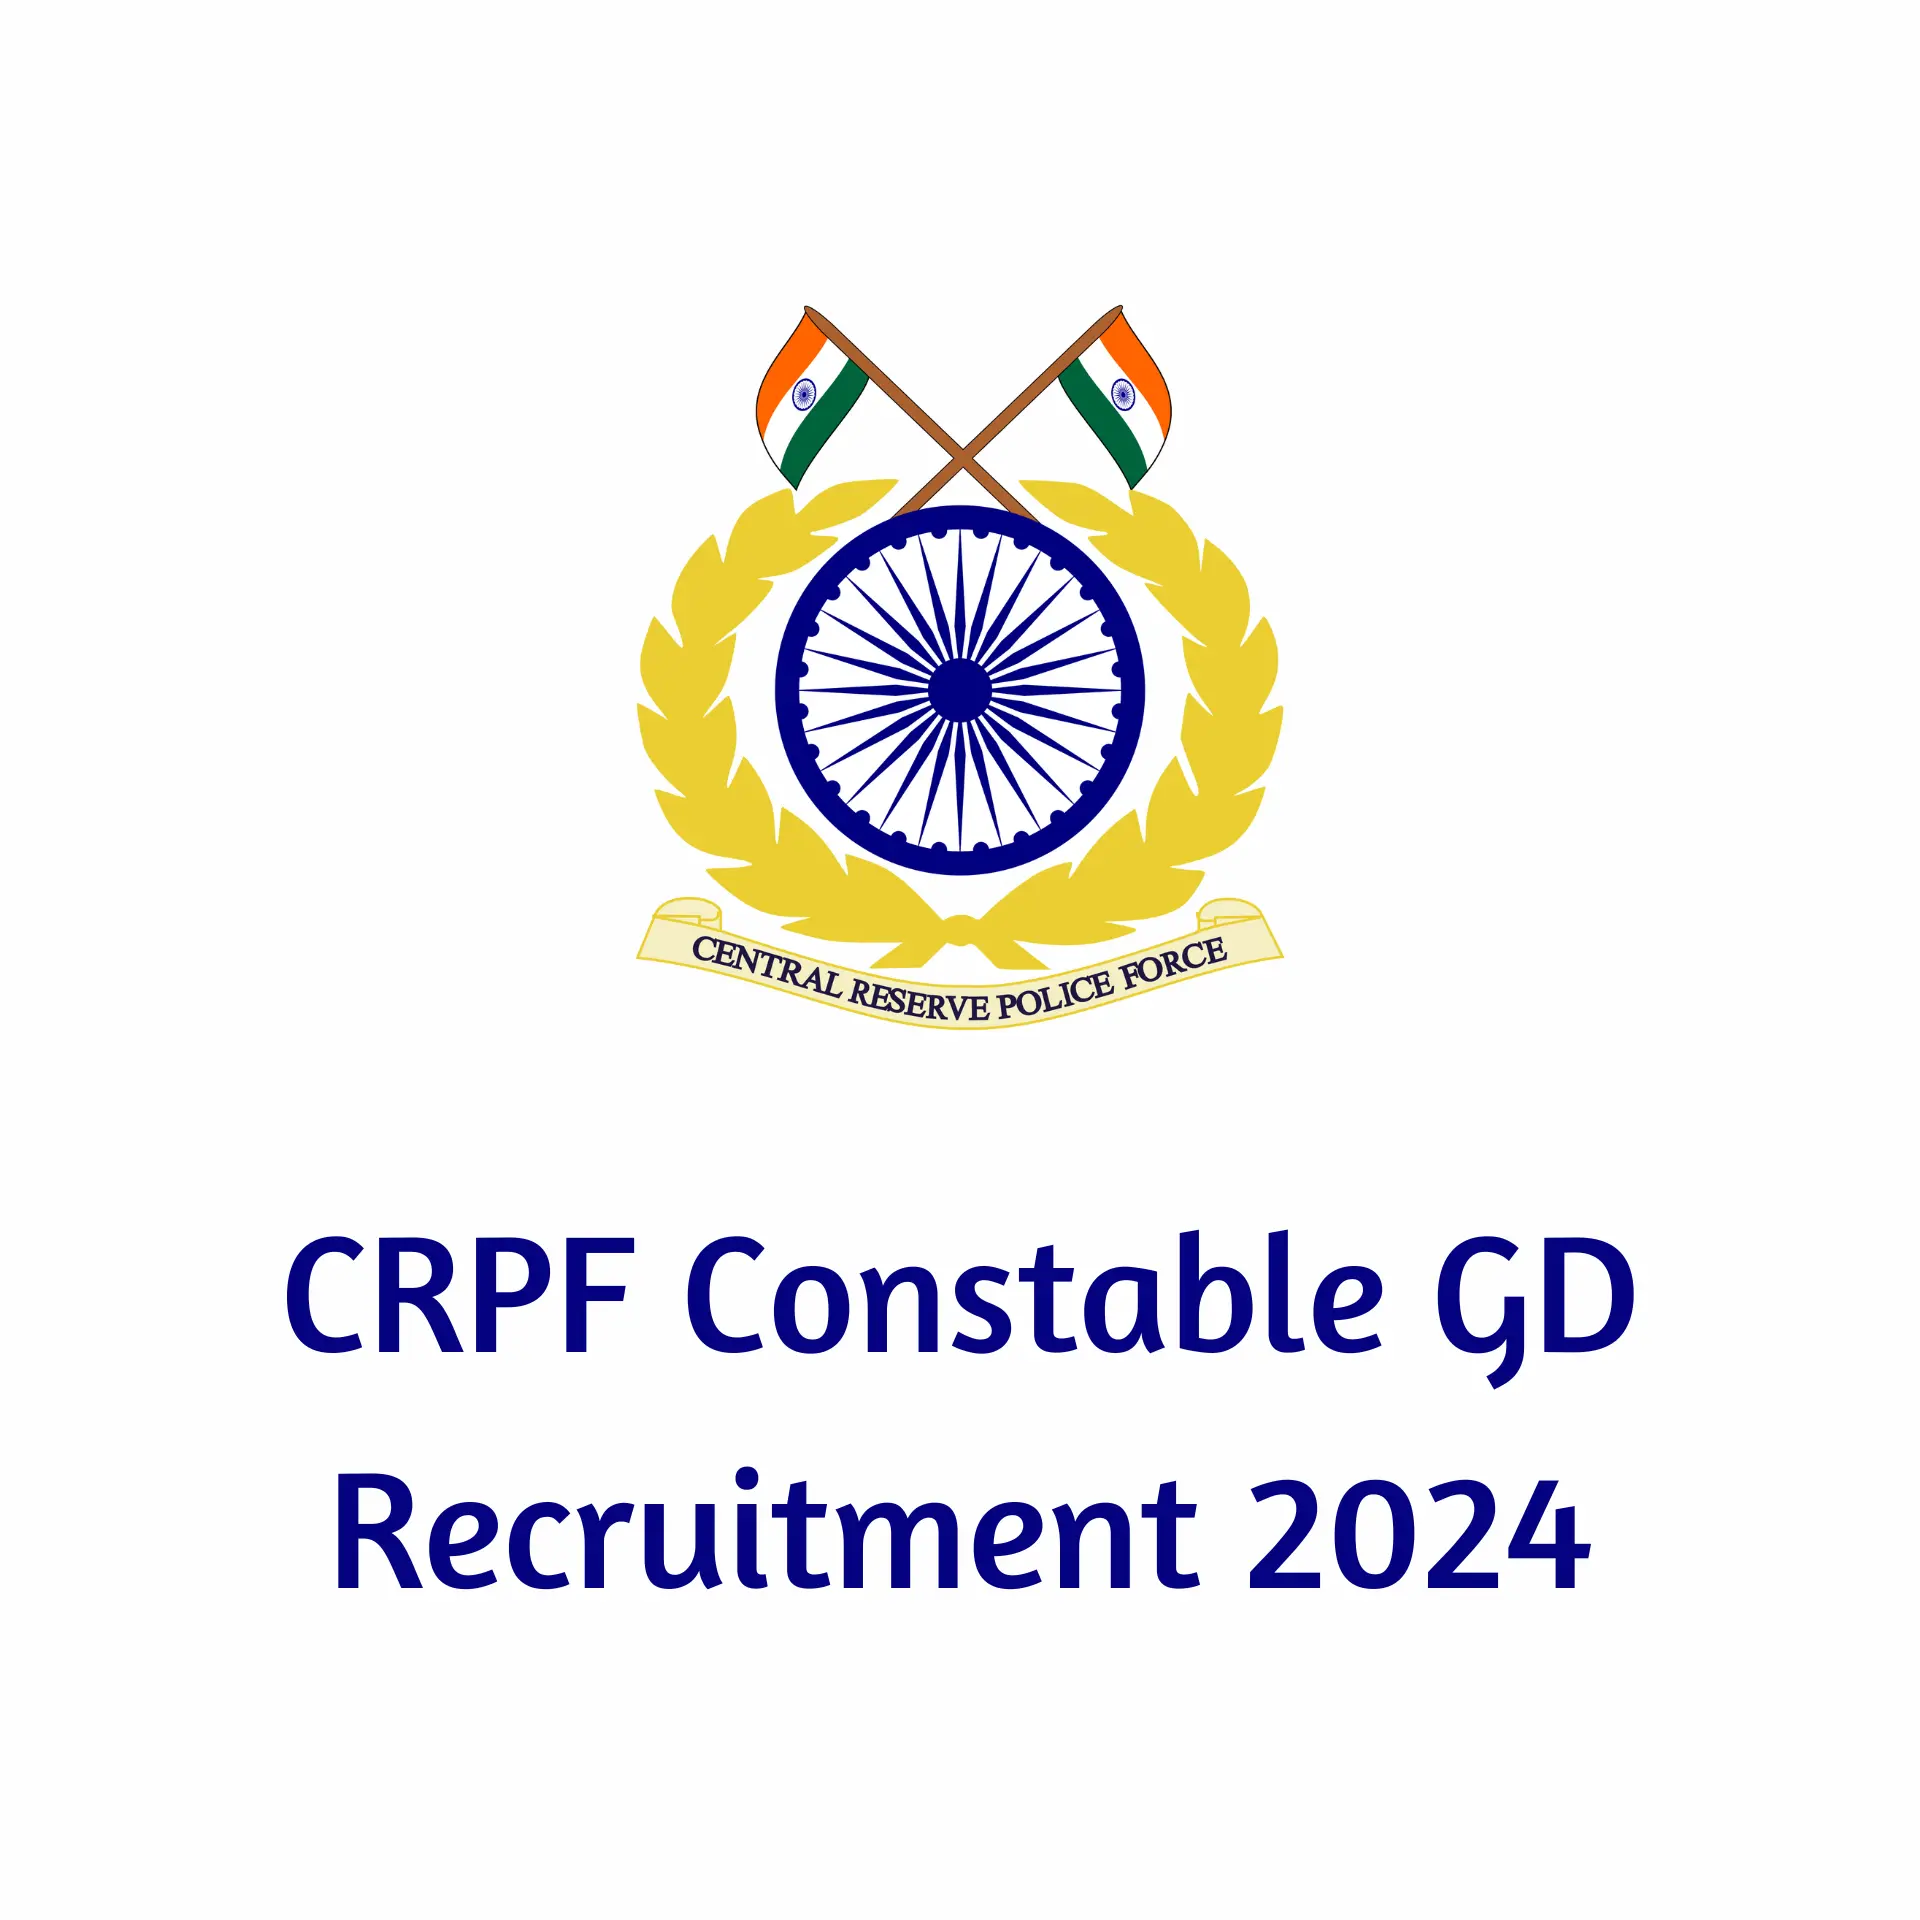 CRPF Constable GD Recruitment 2024, Exam Date, Eligibility, Fee and